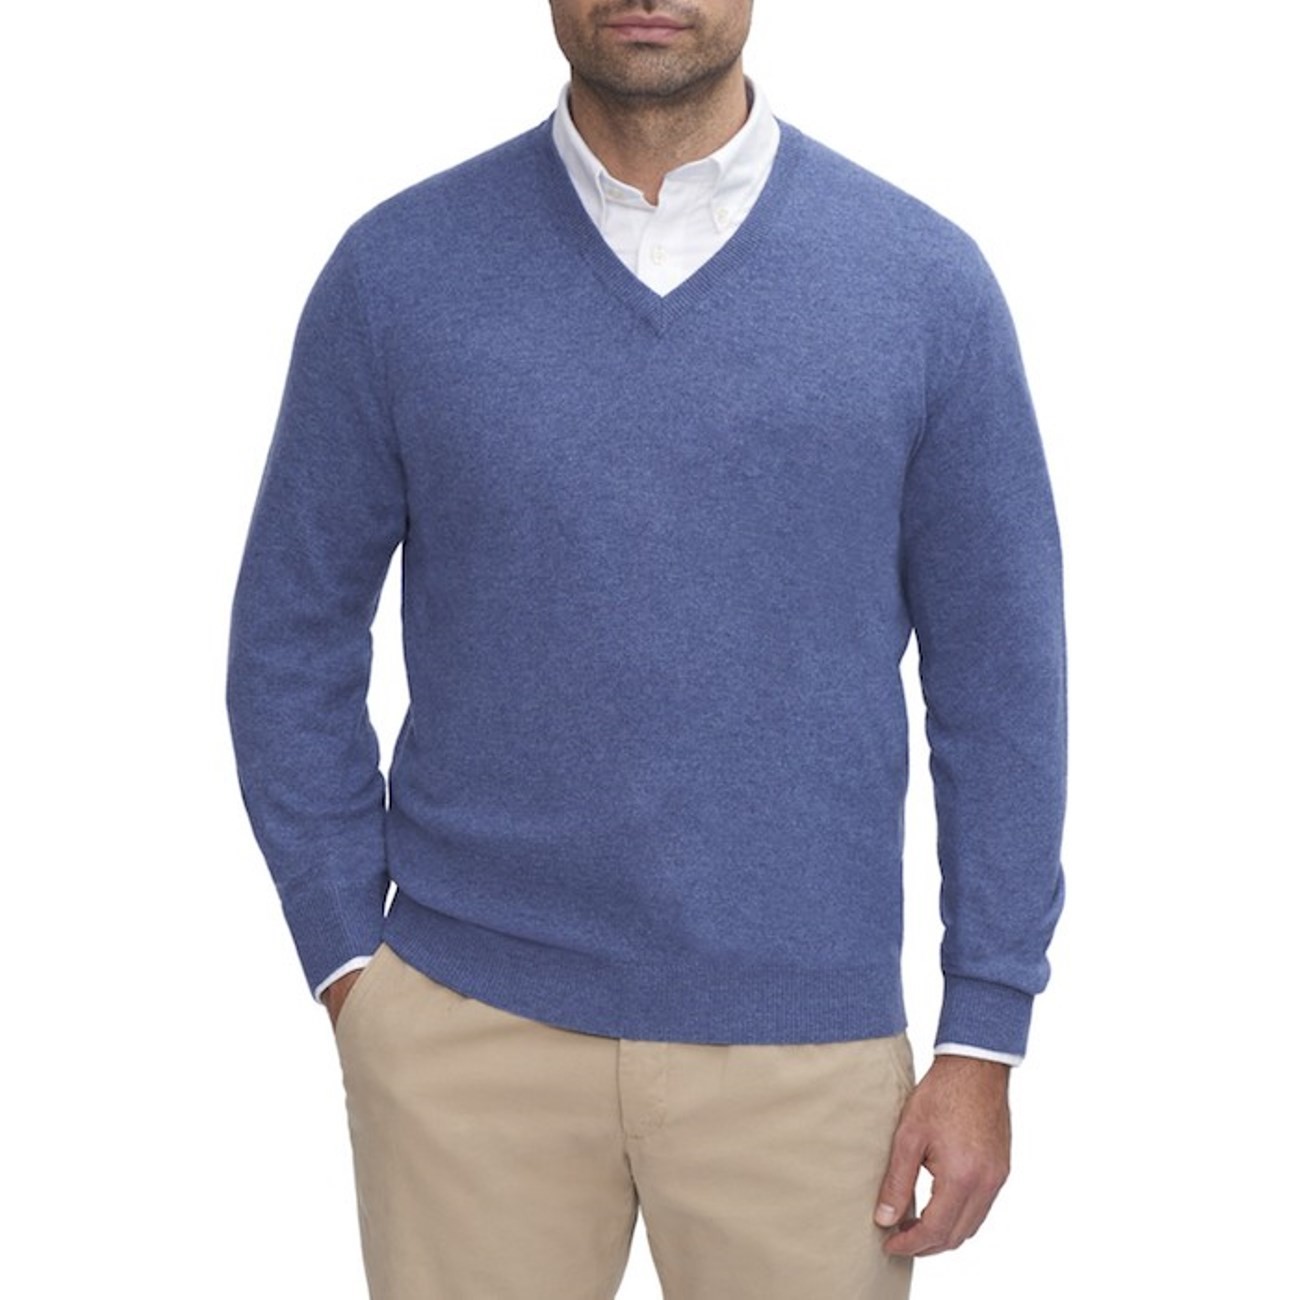 Light Grey Men's V-Neck Sweaters - 100% Cashmere Made in Scotland